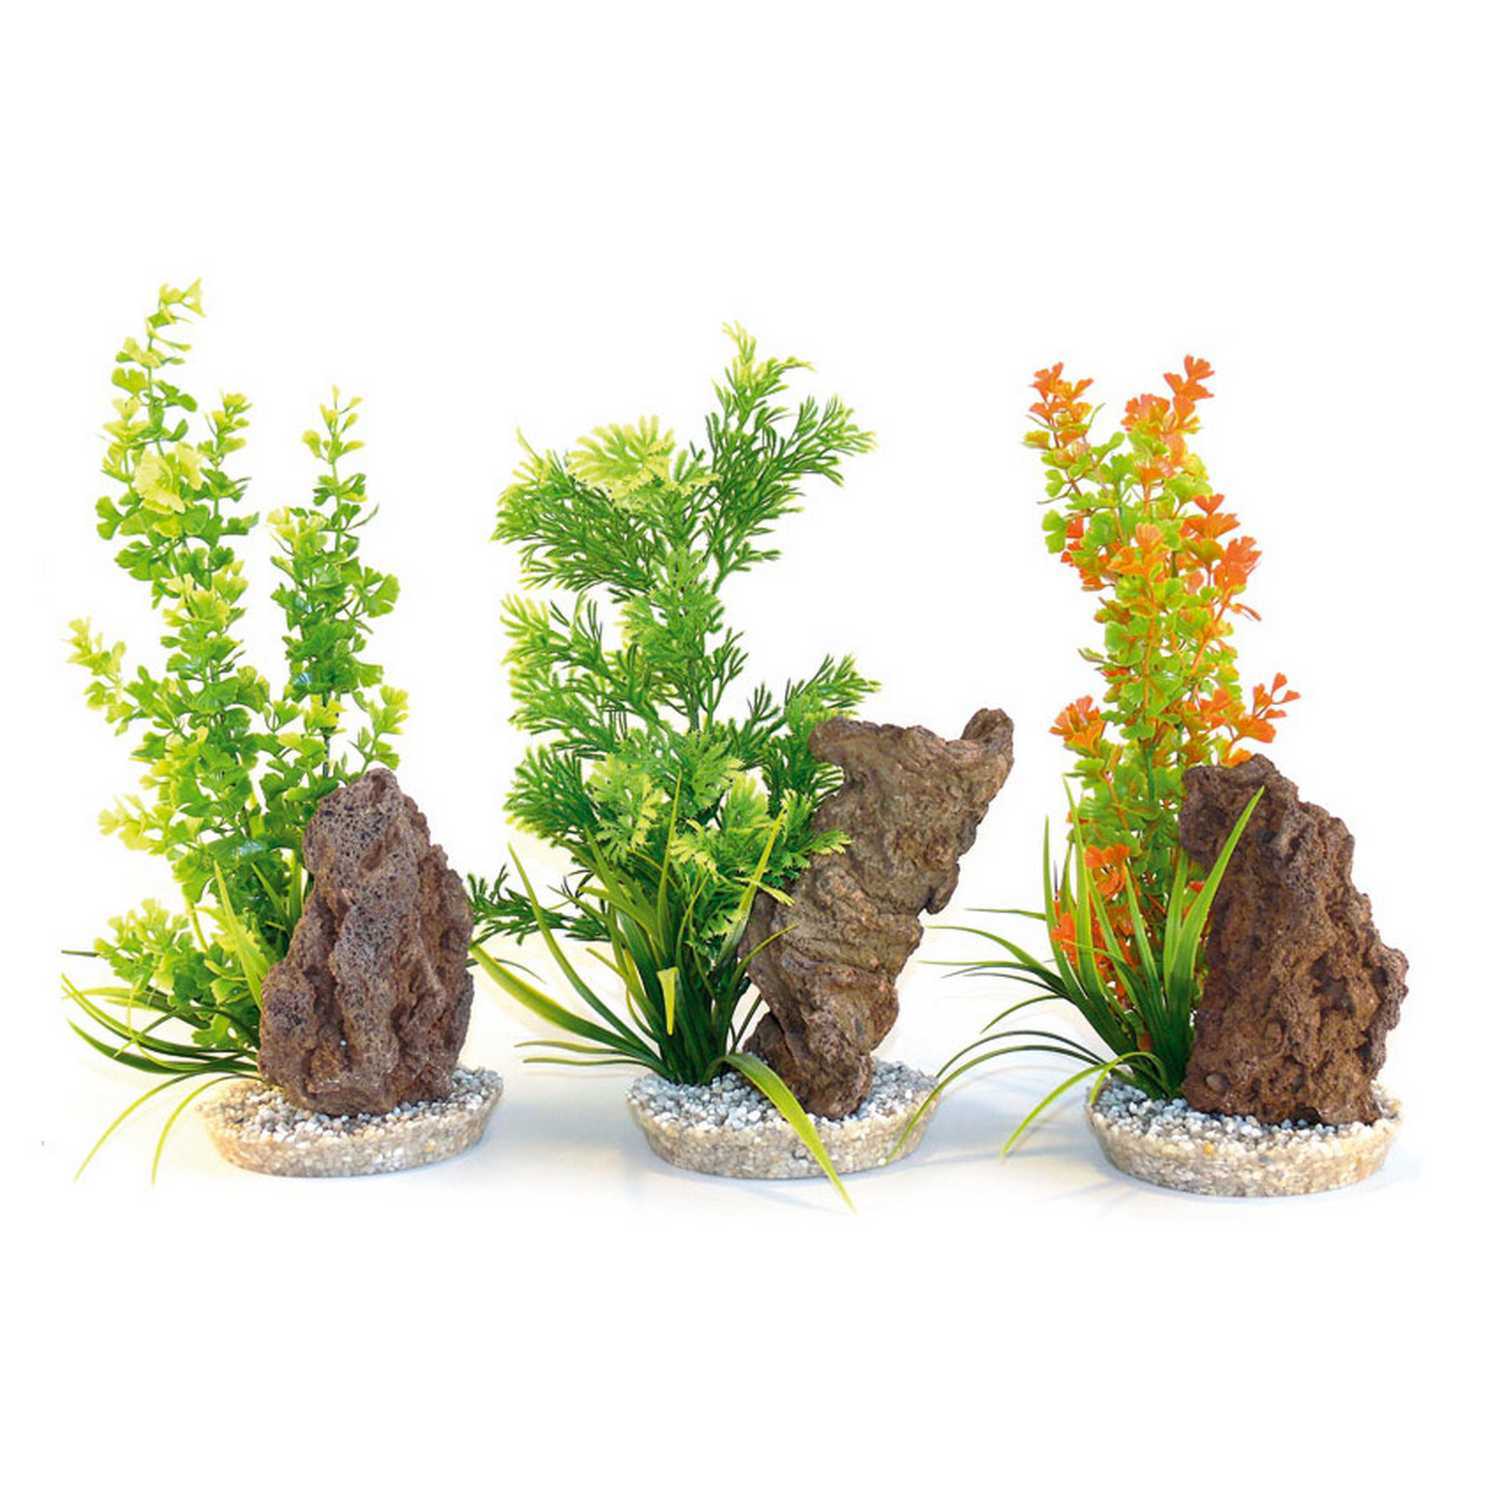 Sydeco Aquaplant with Rock Image